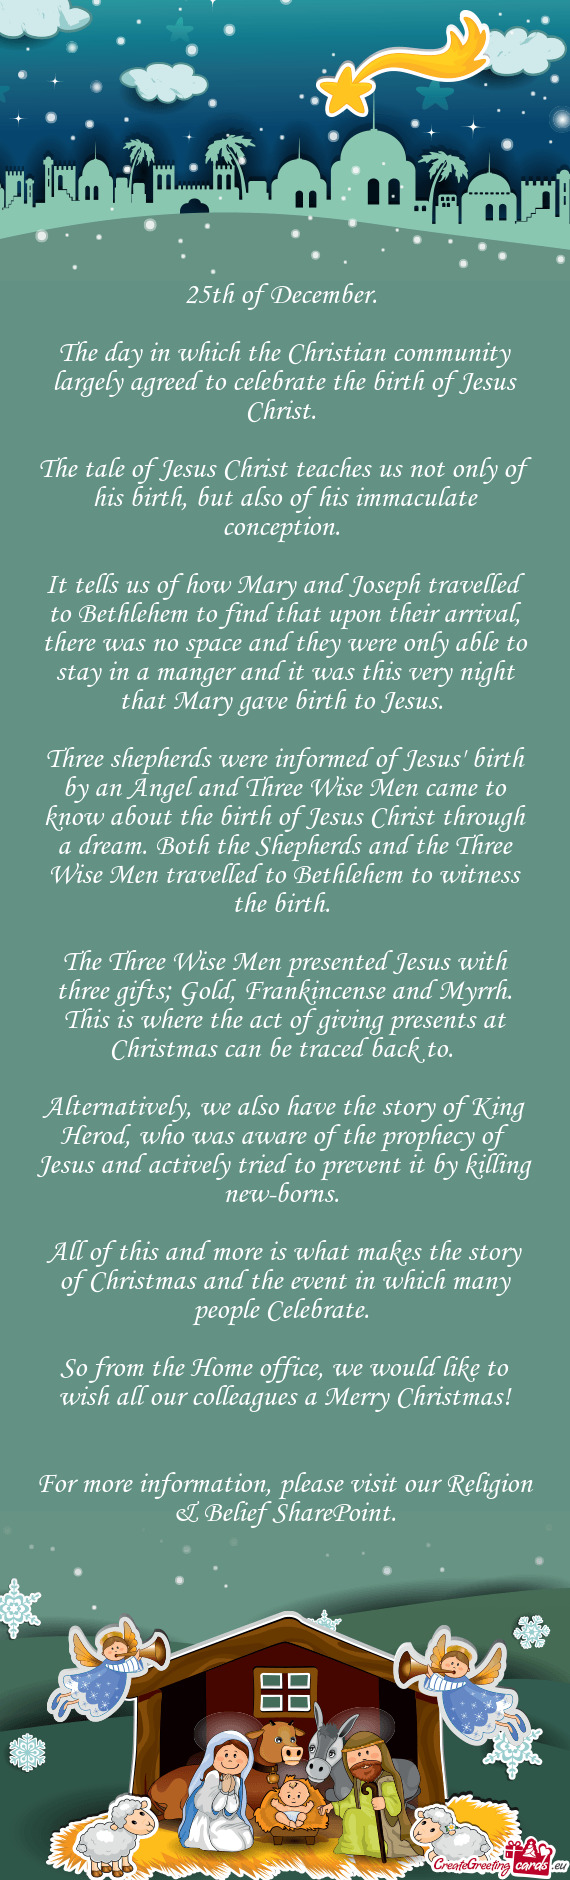 The tale of Jesus Christ teaches us not only of his birth, but also of his immaculate conception